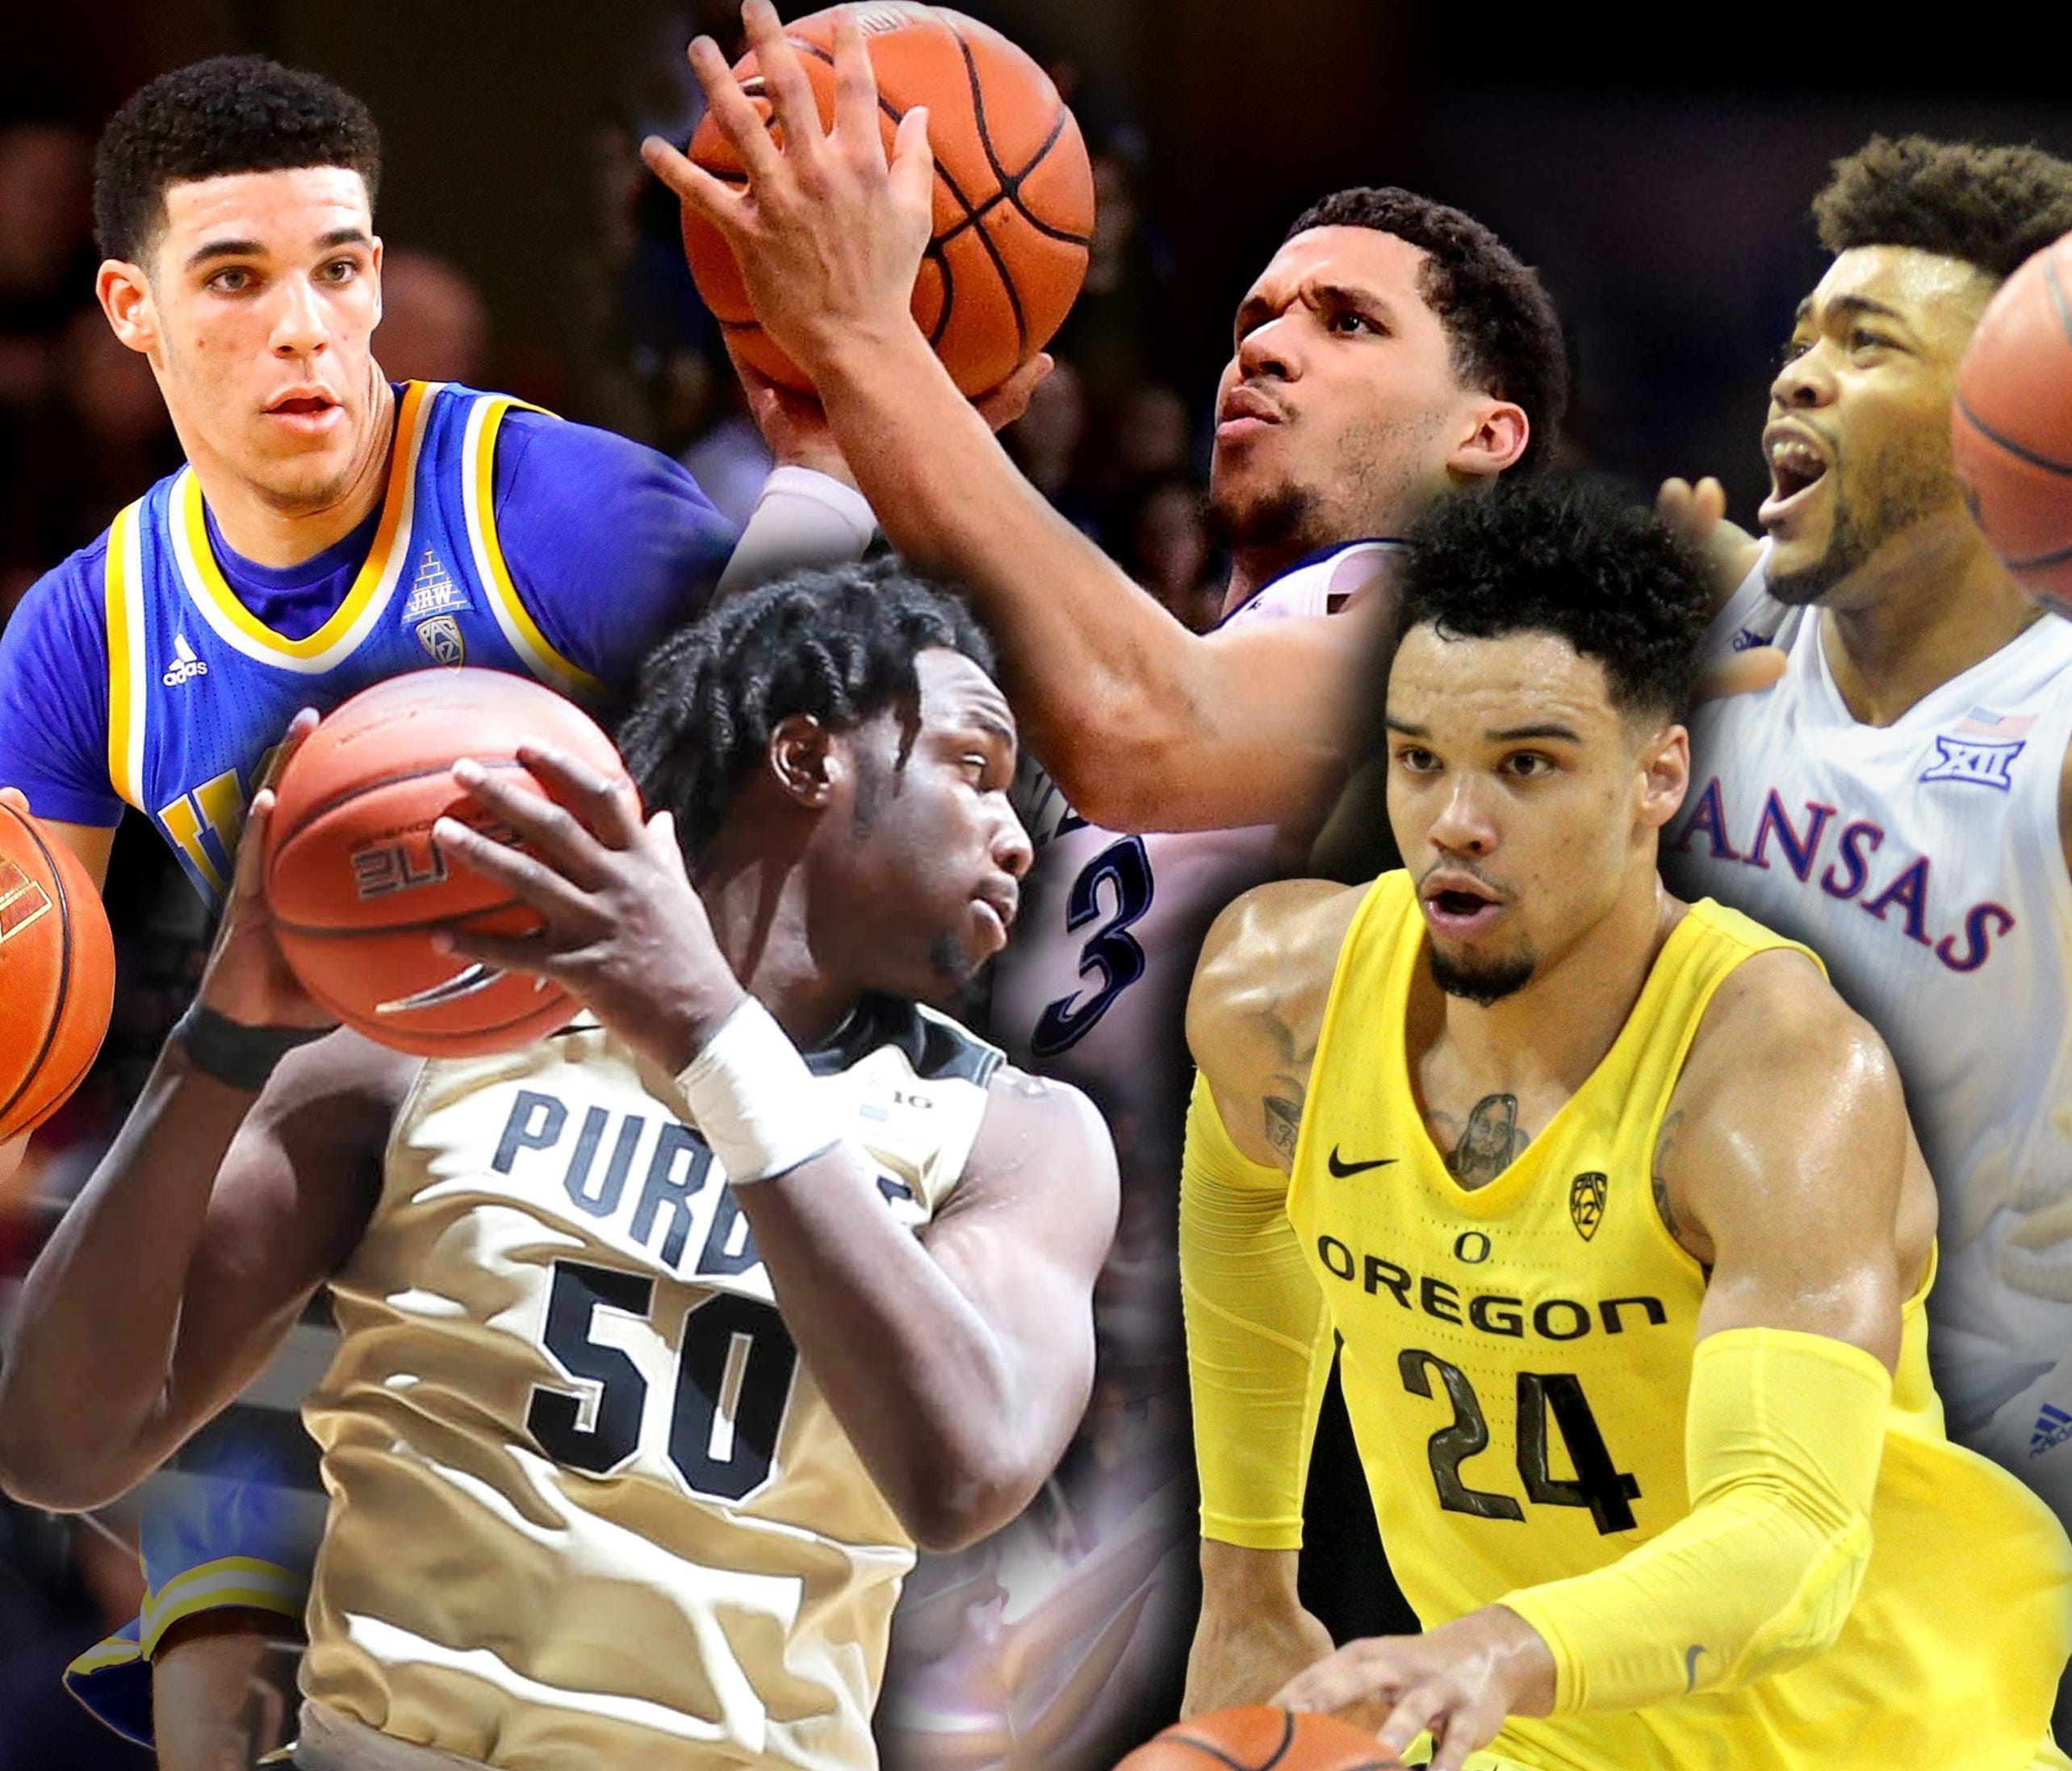 Lonzo Ball, Dillon Brooks, Josh Hart, Frank Mason III and Caleb Swanigan have been named USA TODAY's first team All-Americans.